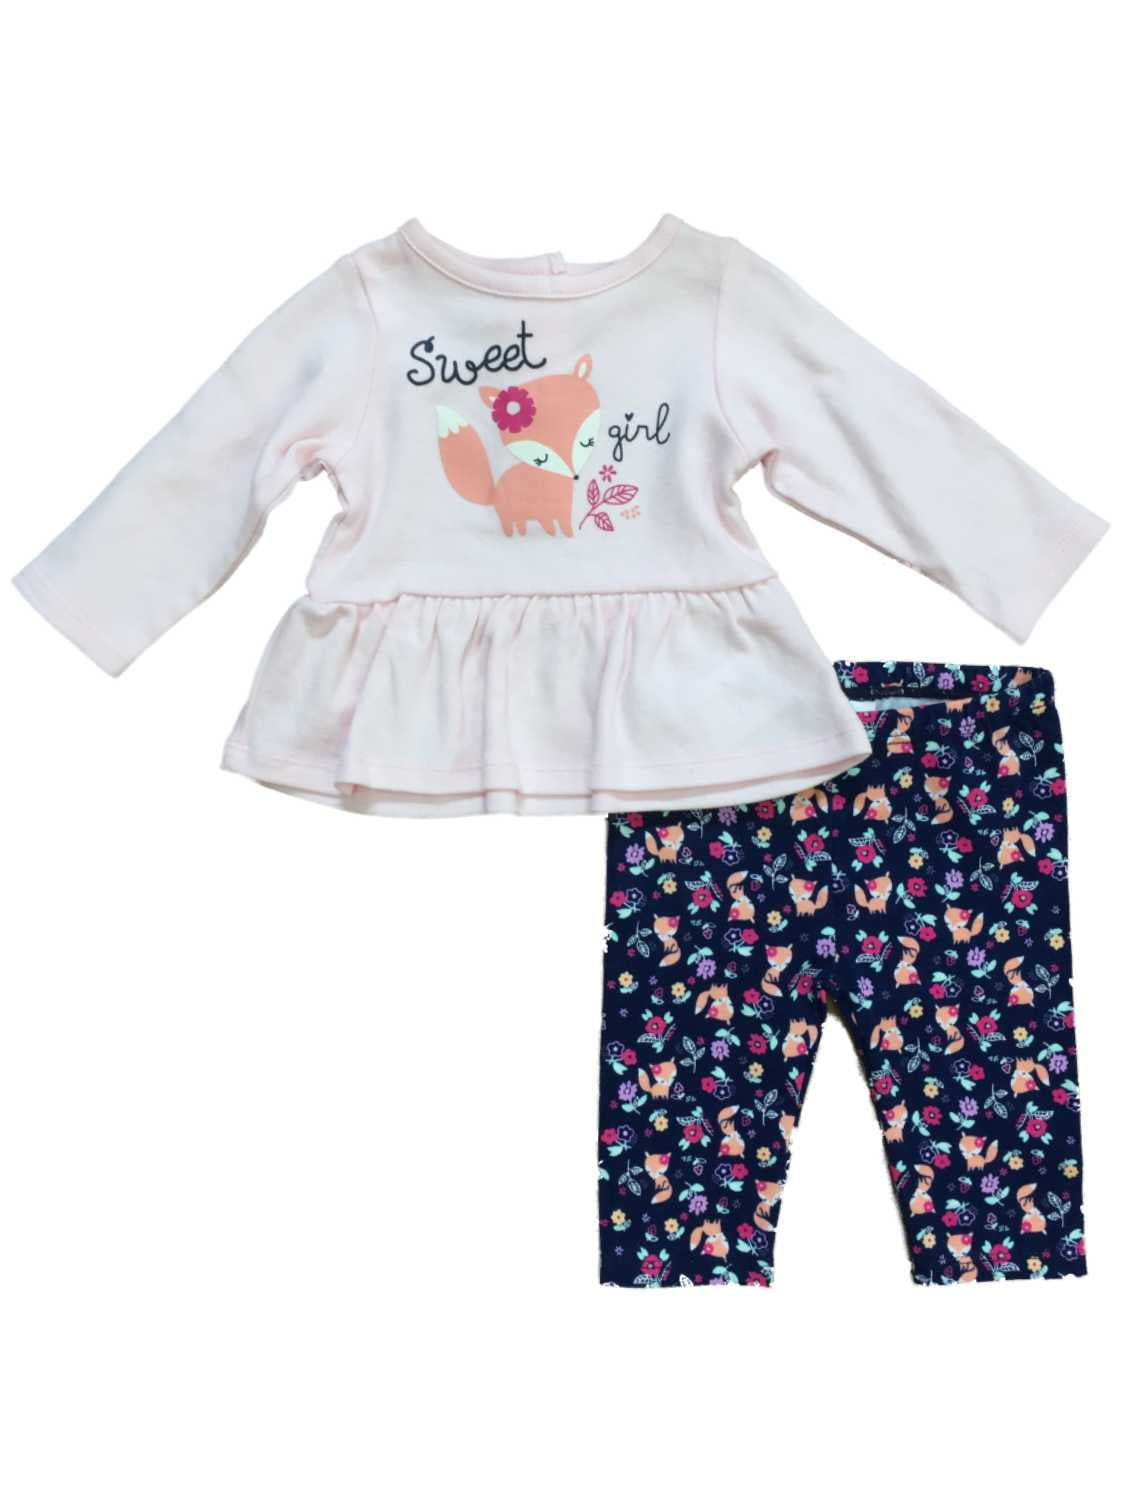 baby girl fox outfit